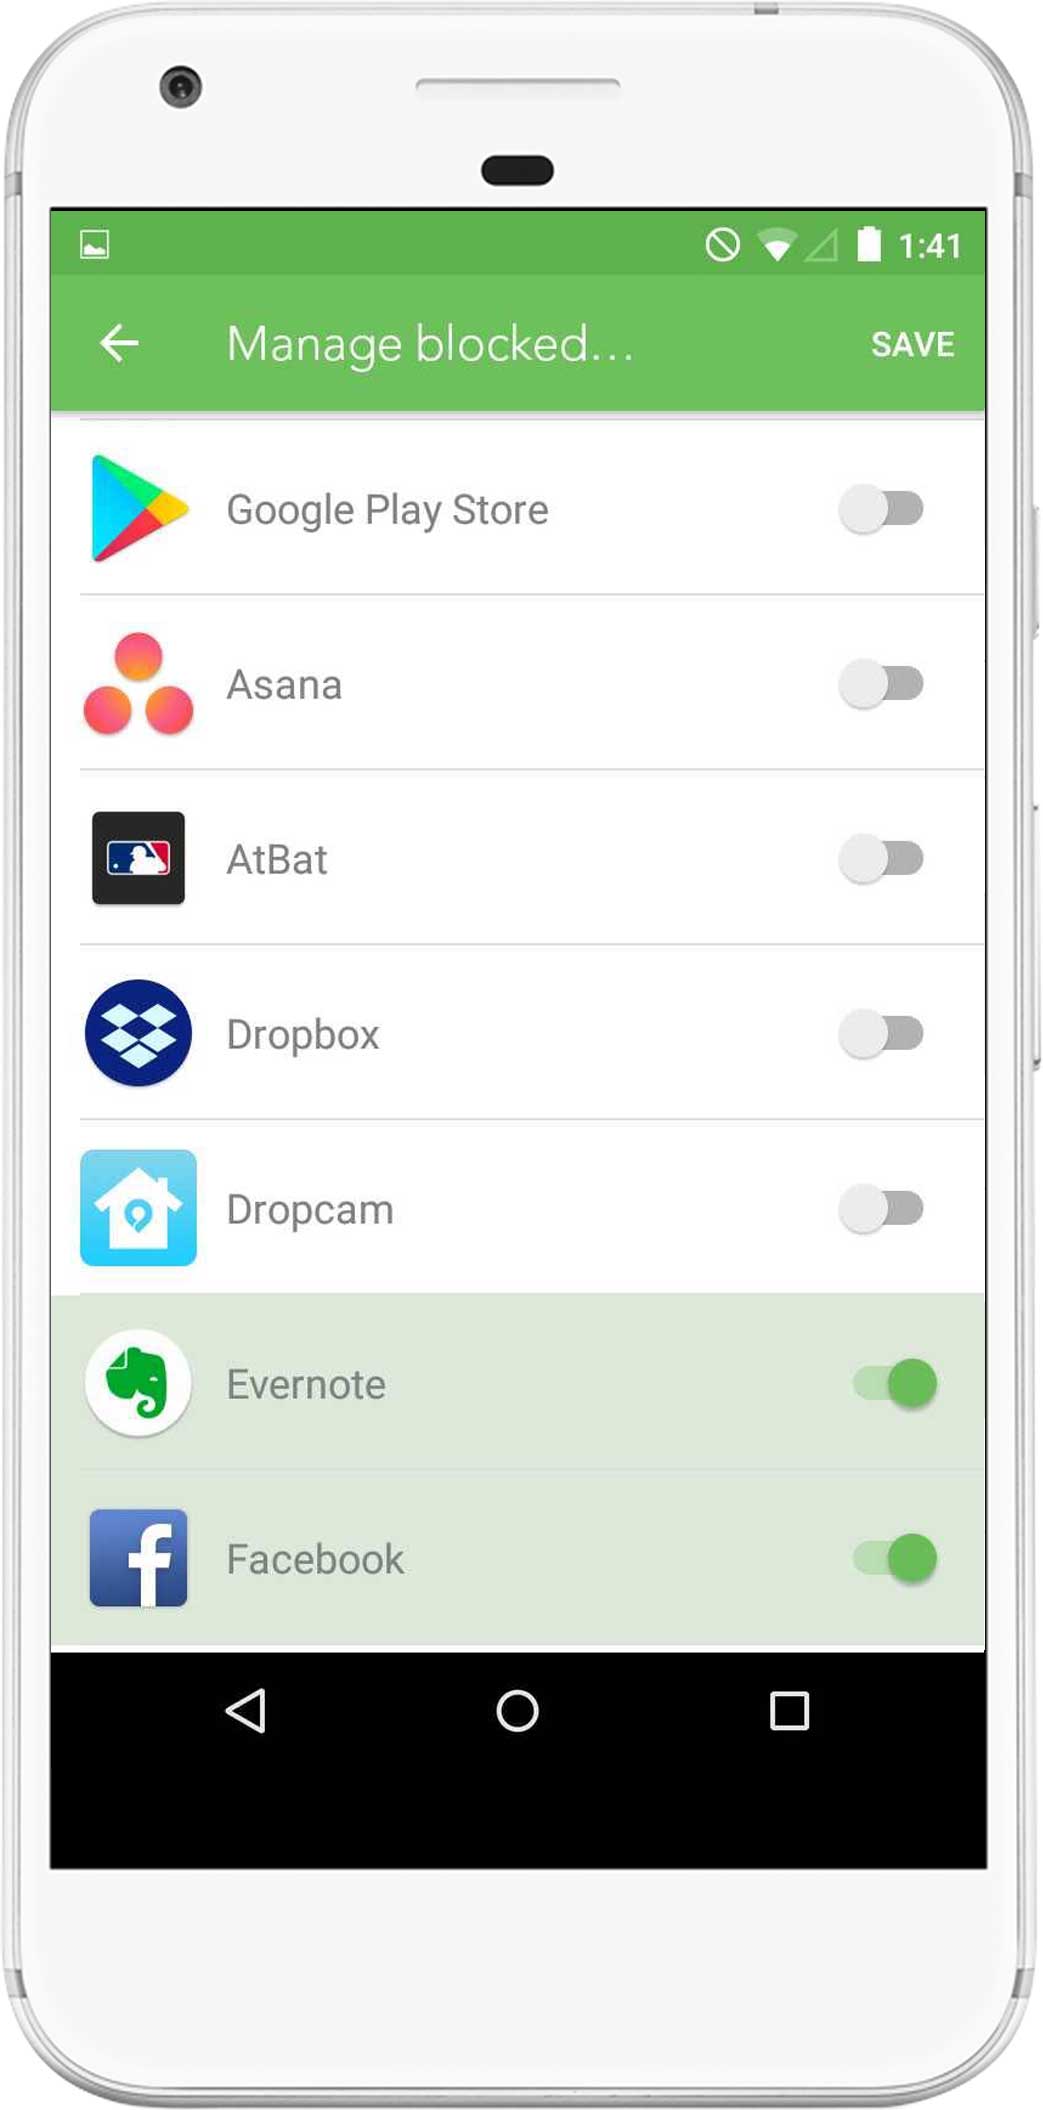 A screenshot showing a list of apps that can be blocked with Freedom for Android.